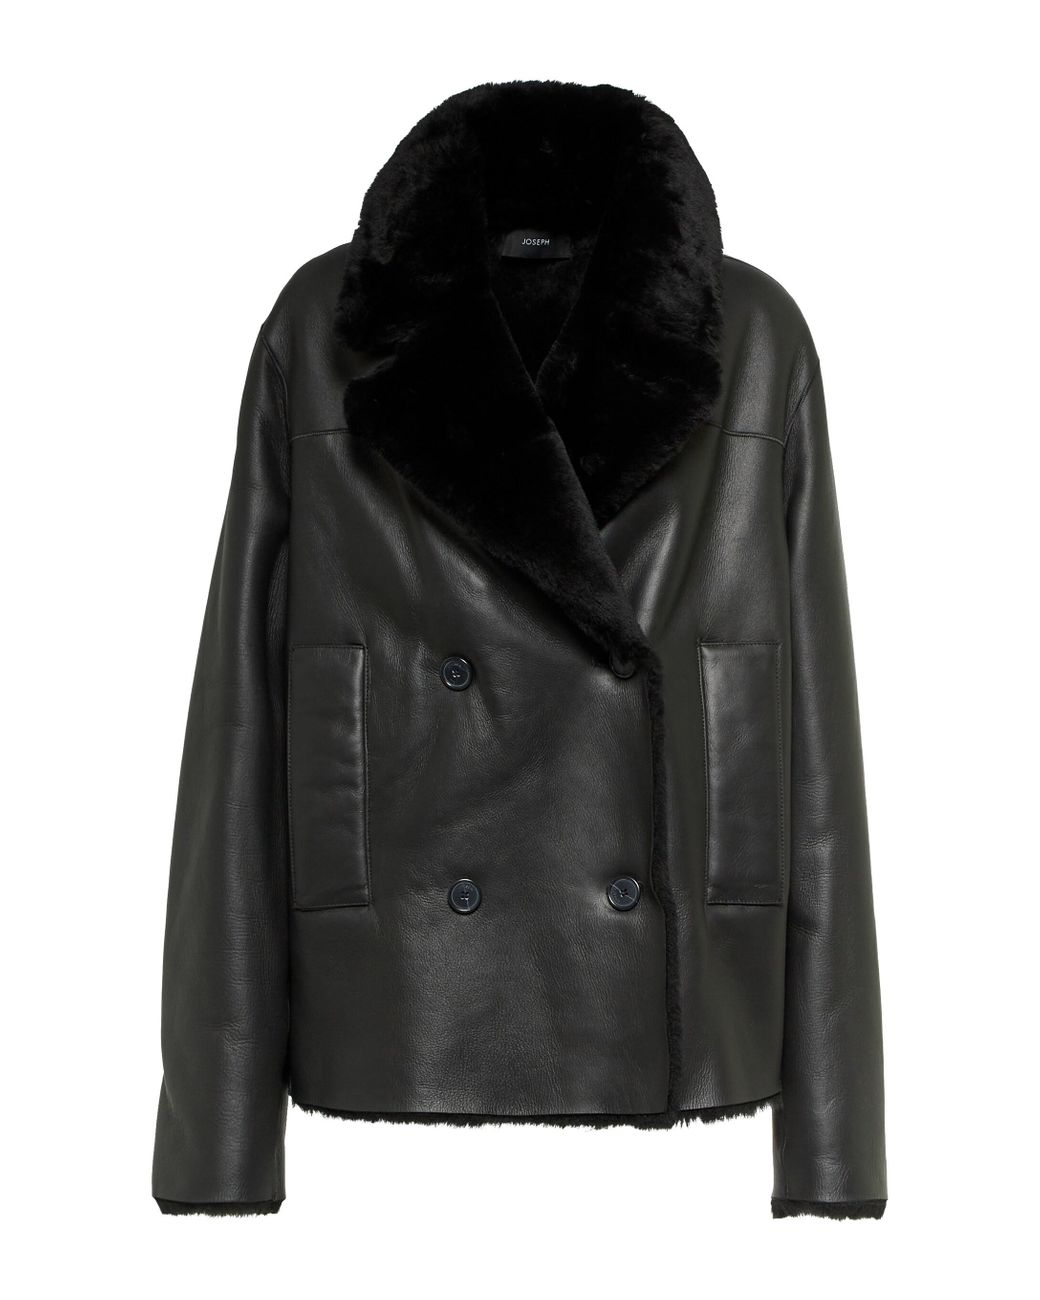 JOSEPH Calla Shearling And Leather Jacket in Black | Lyst UK